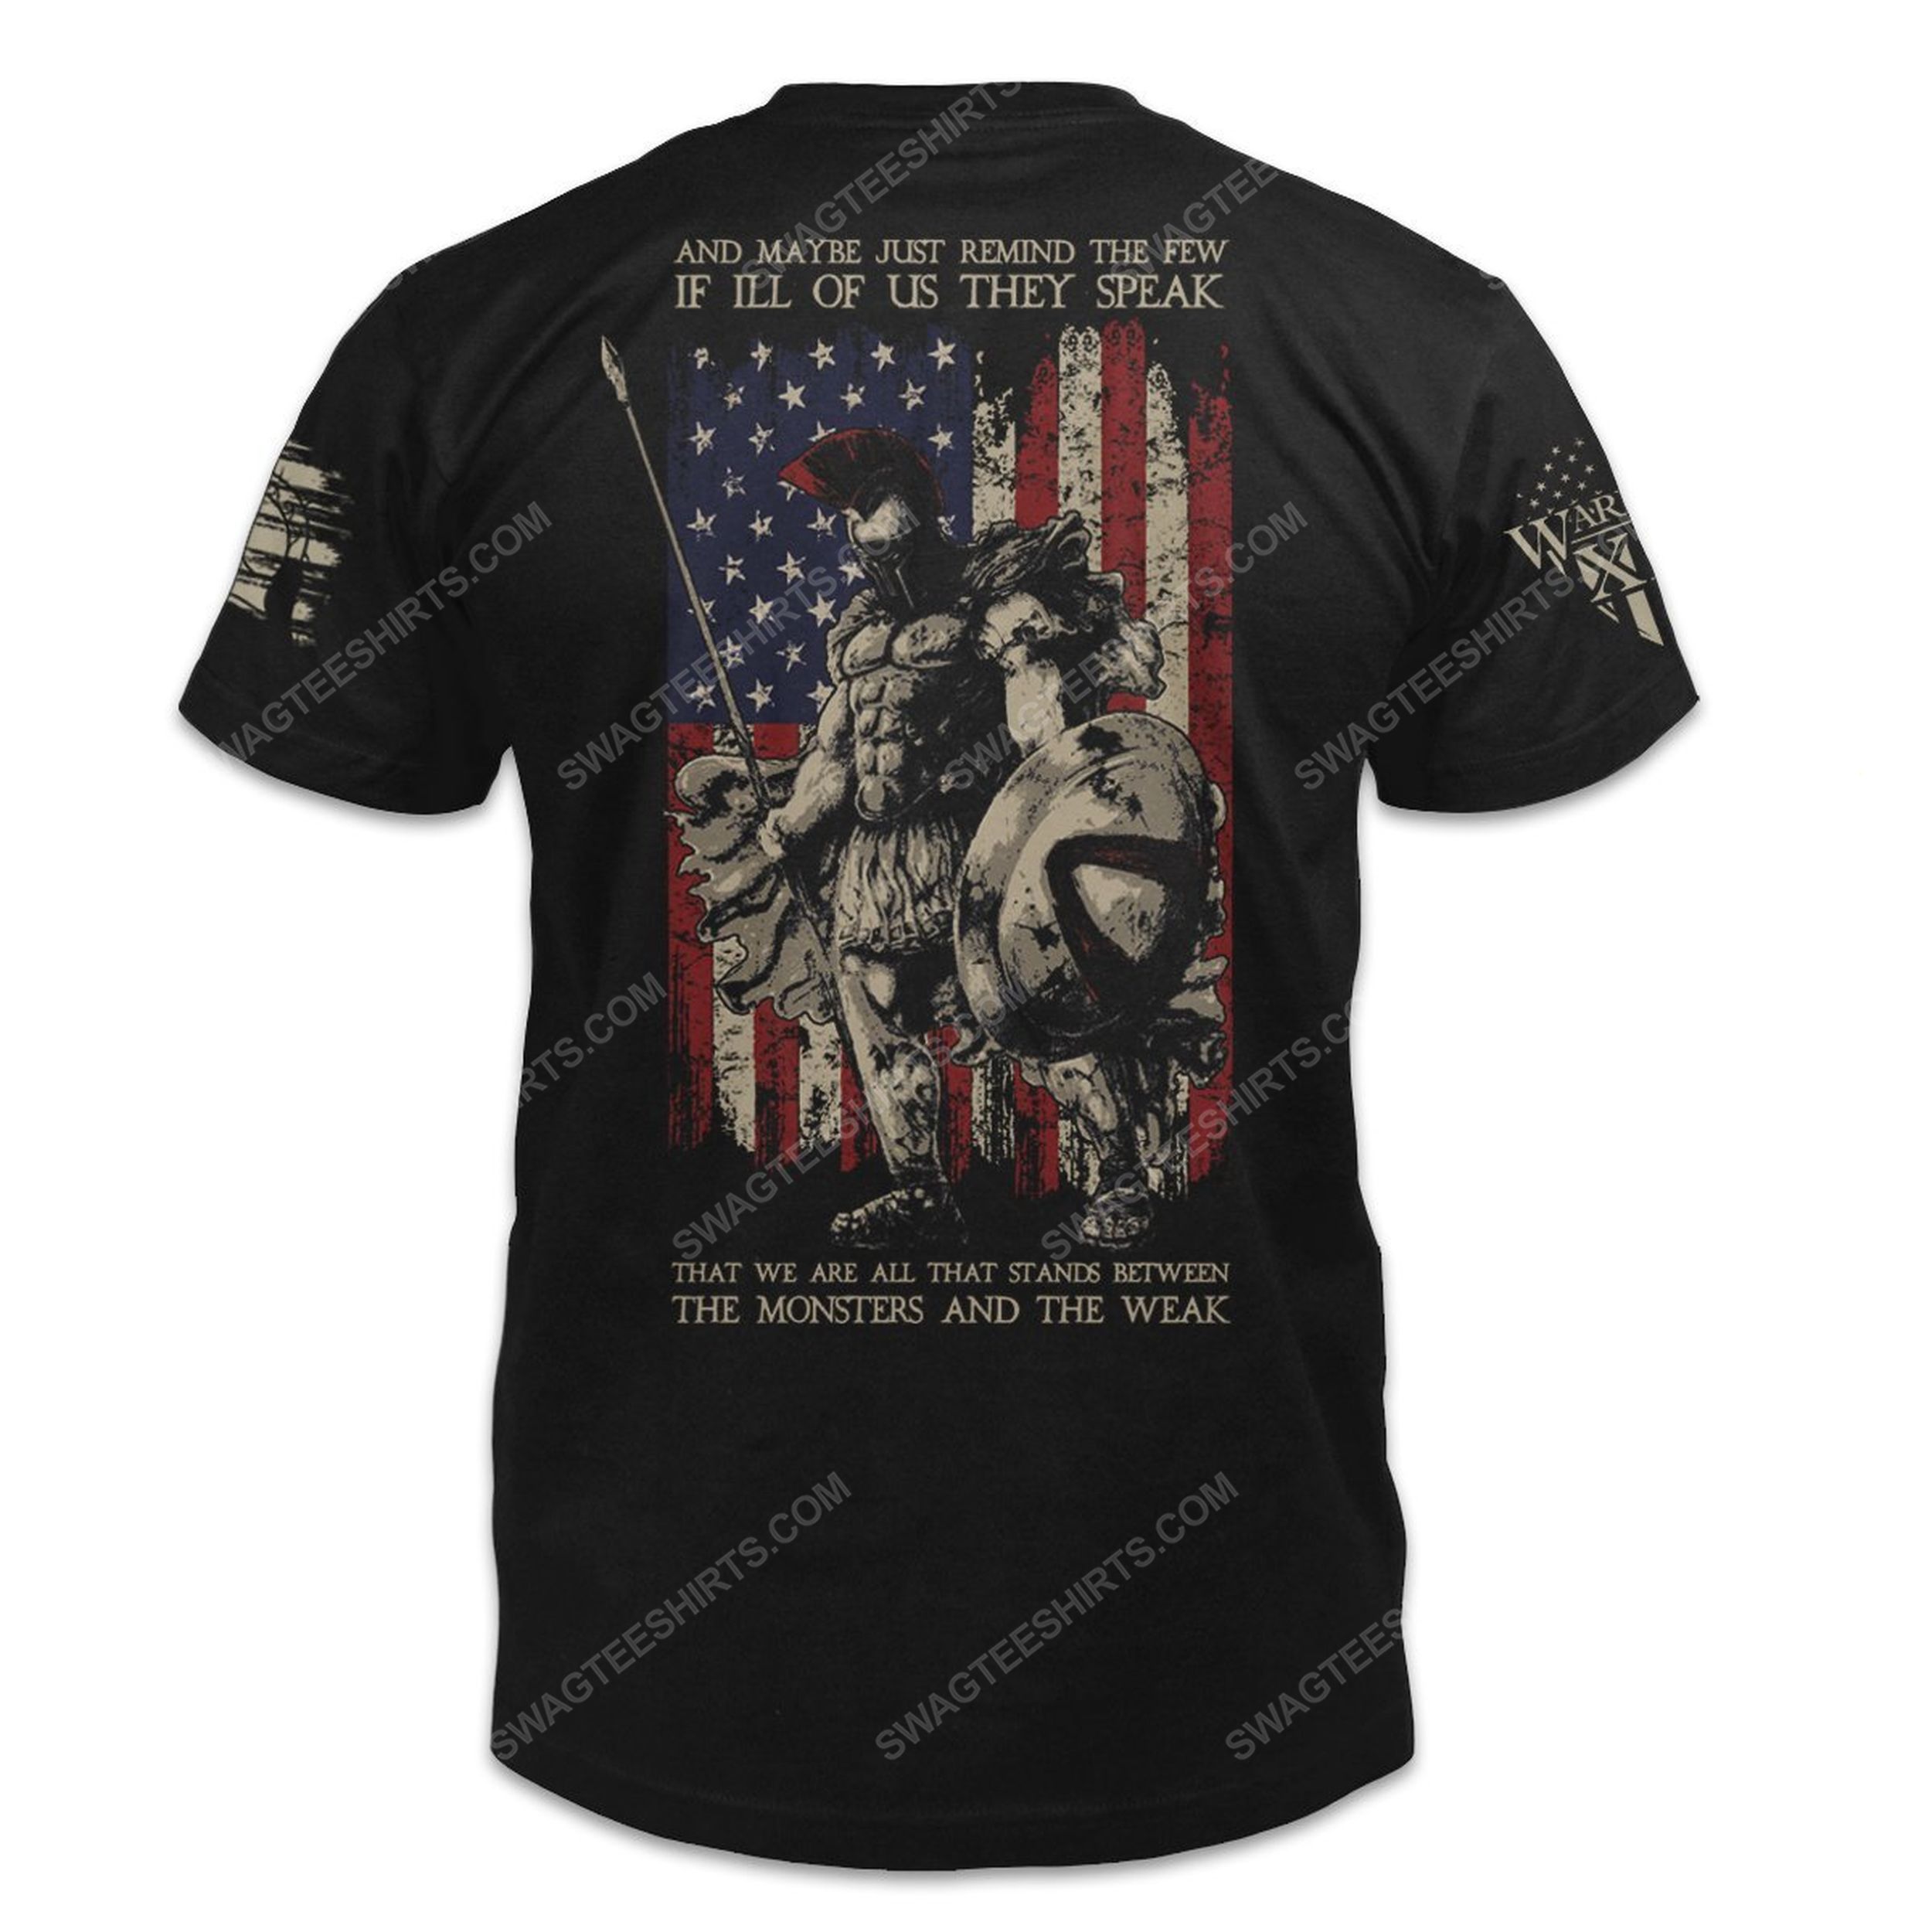 [special edition] And maybe just remind the few if ill of us they speak american spartan shirt – maria